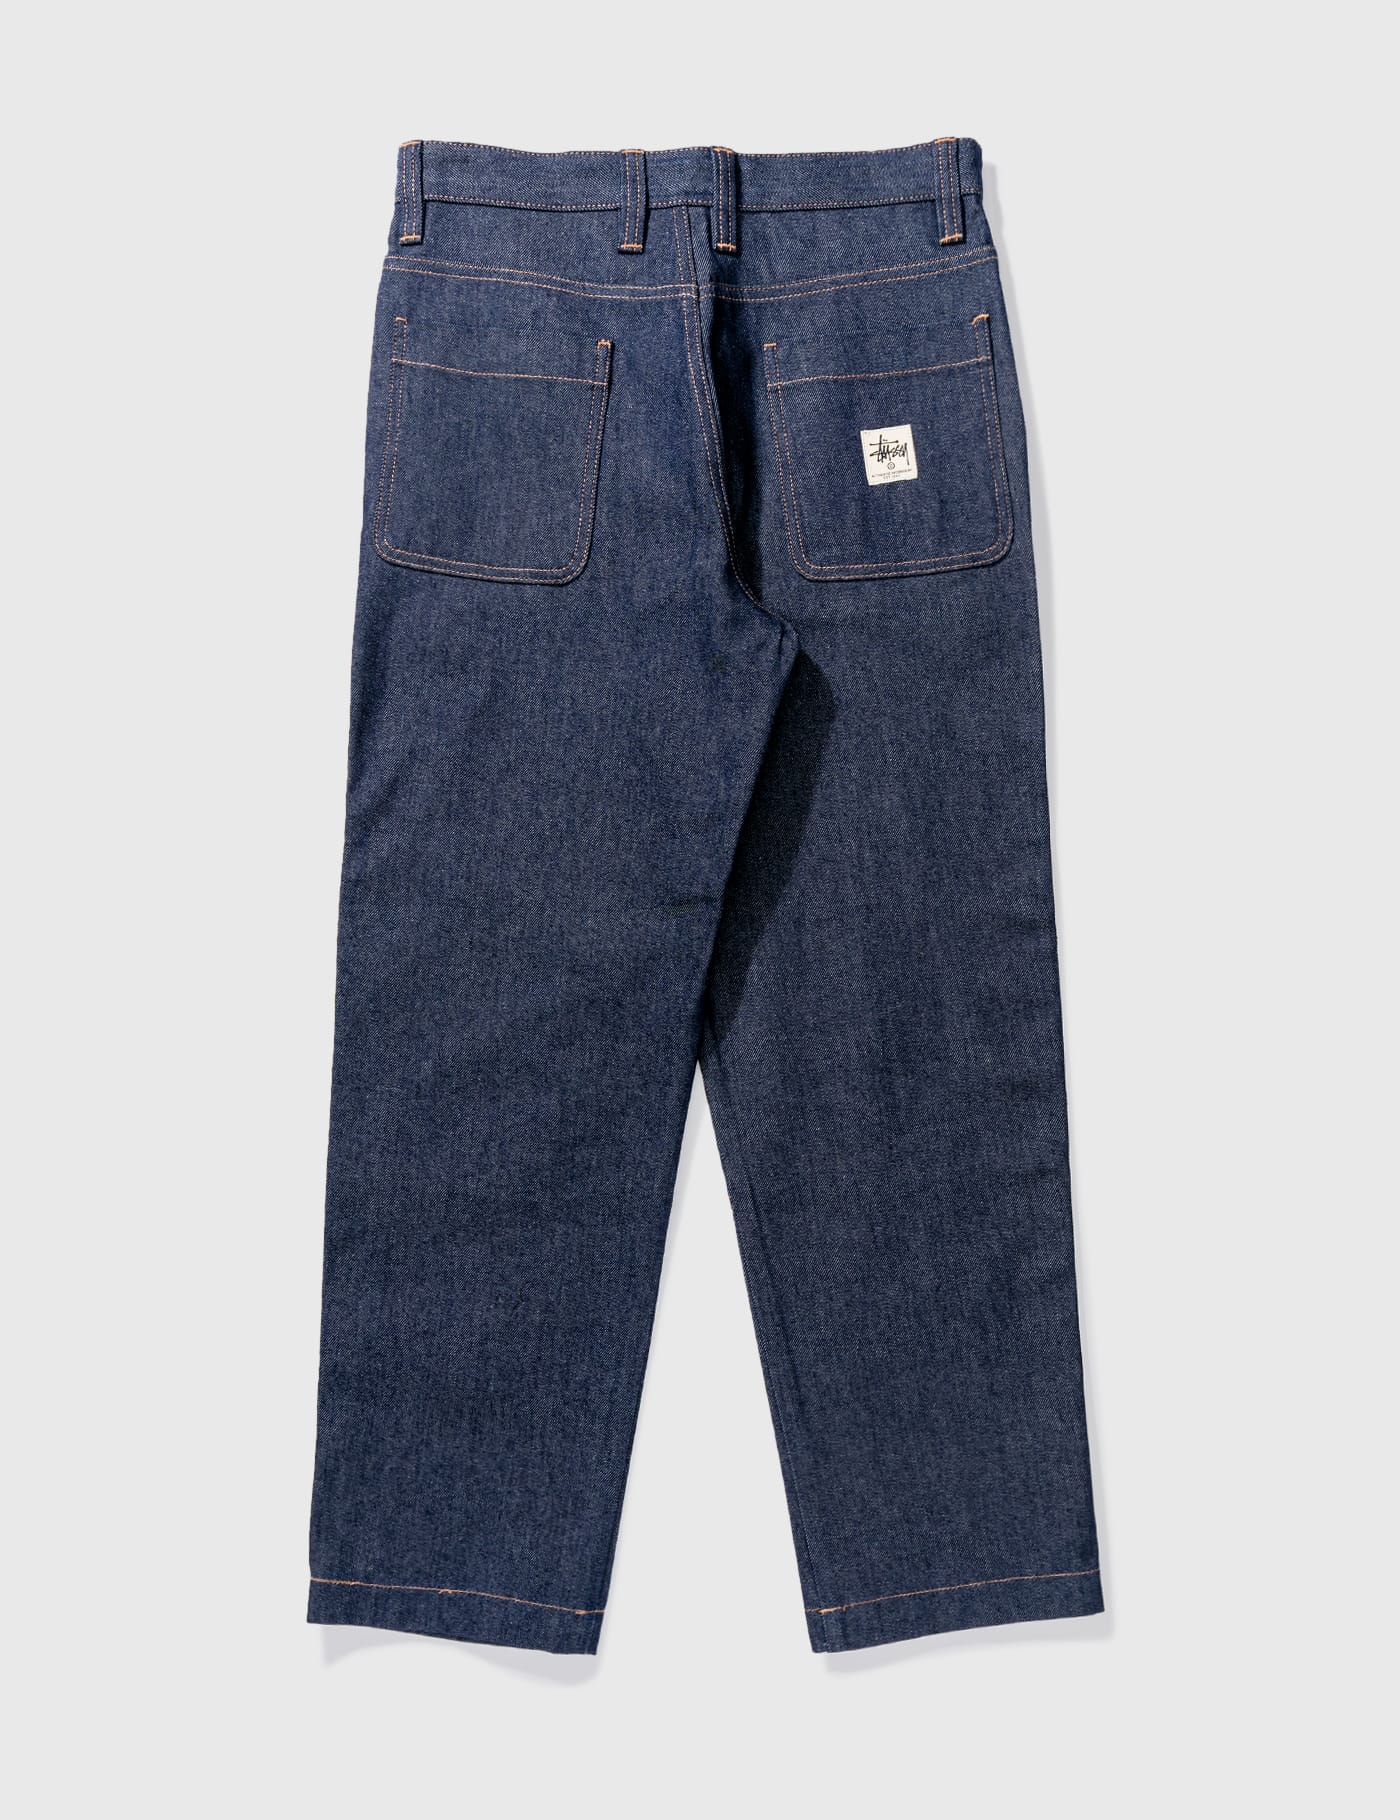 Stüssy - Denim Double Knee Pant | HBX - Globally Curated Fashion 